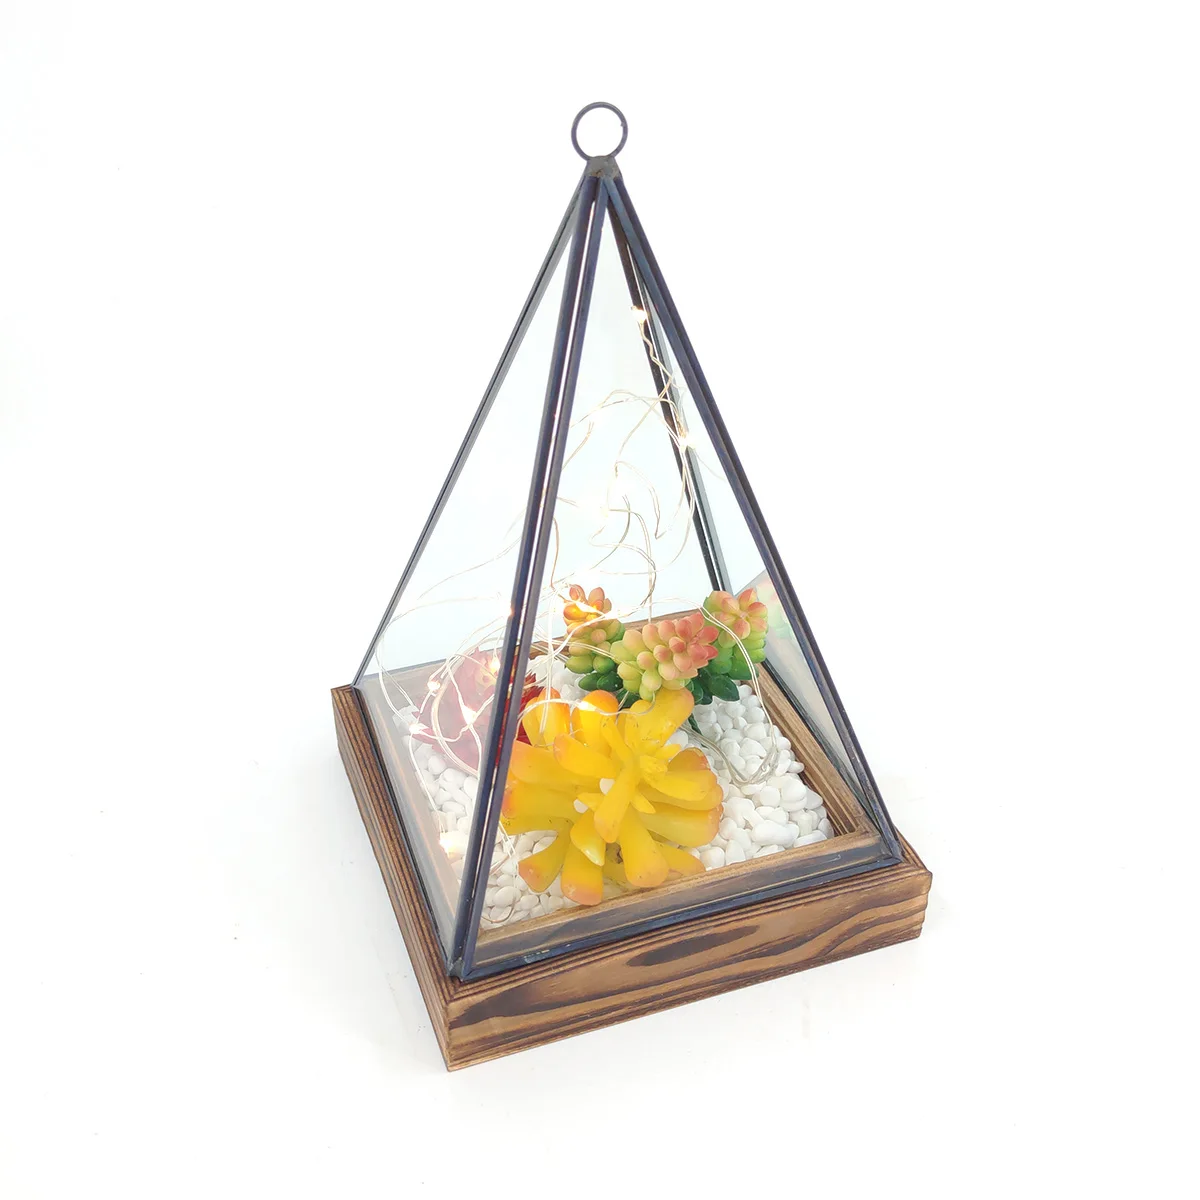 Geometric triangle clear glass indoor succulent plants hanging container terrarium decor with wood base for sale (1600541178398)